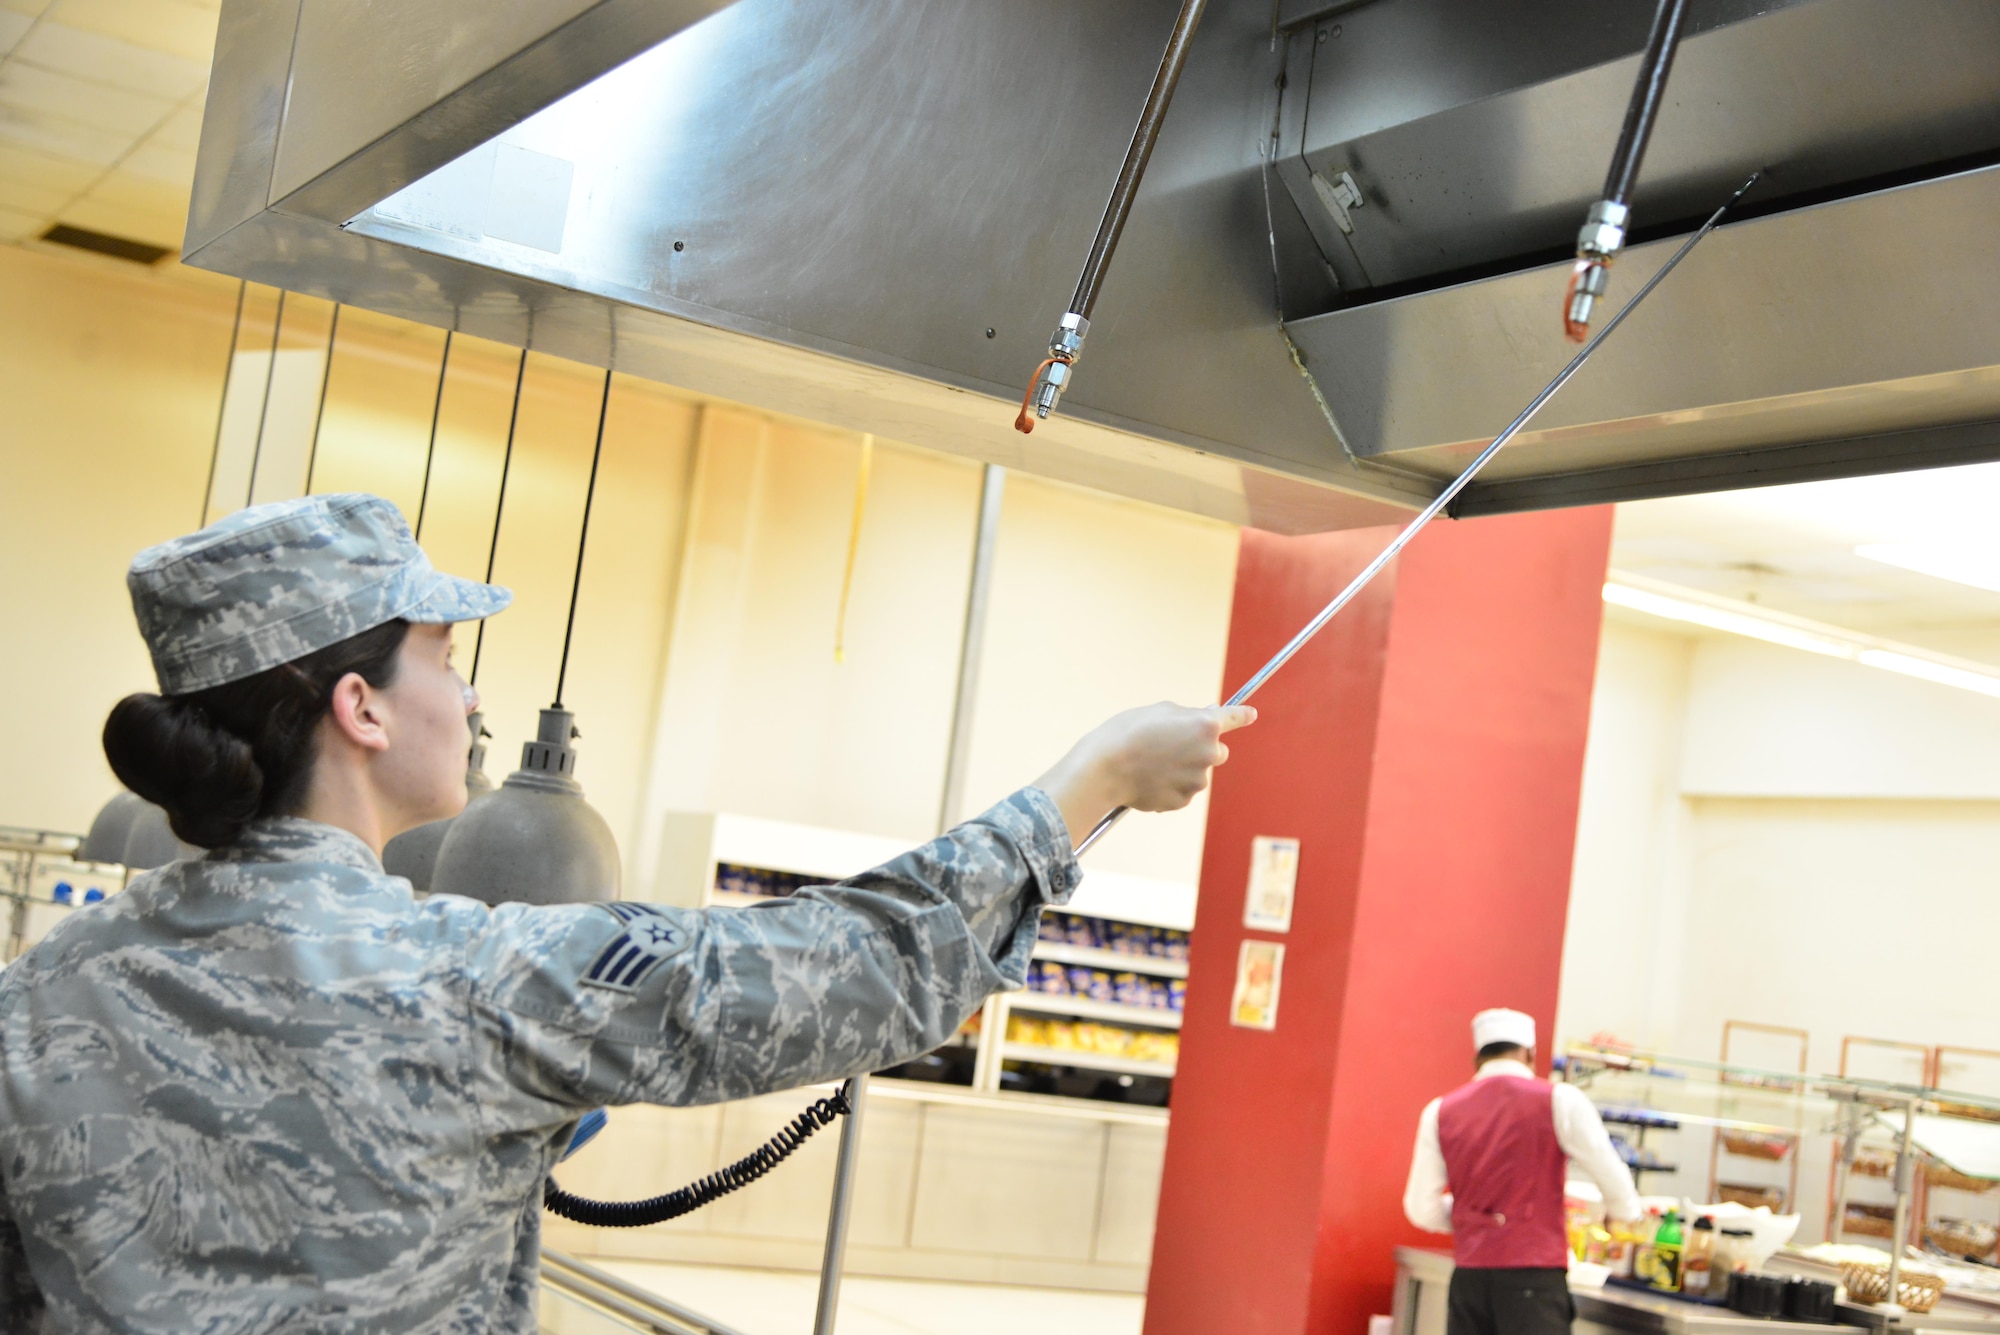 Senior Airman Leah Smith, 379th Expeditionary Medical Operations Support Squadron Bioenvironmental, uses a Direct-Reading instrument to measure the flow rate of air that is being passed through the dining facility ventilation system September 30, 2015 at Al Udeid Air Base, Qatar. (U.S. Air Force photo/Staff Sgt. Alexandre Montes)